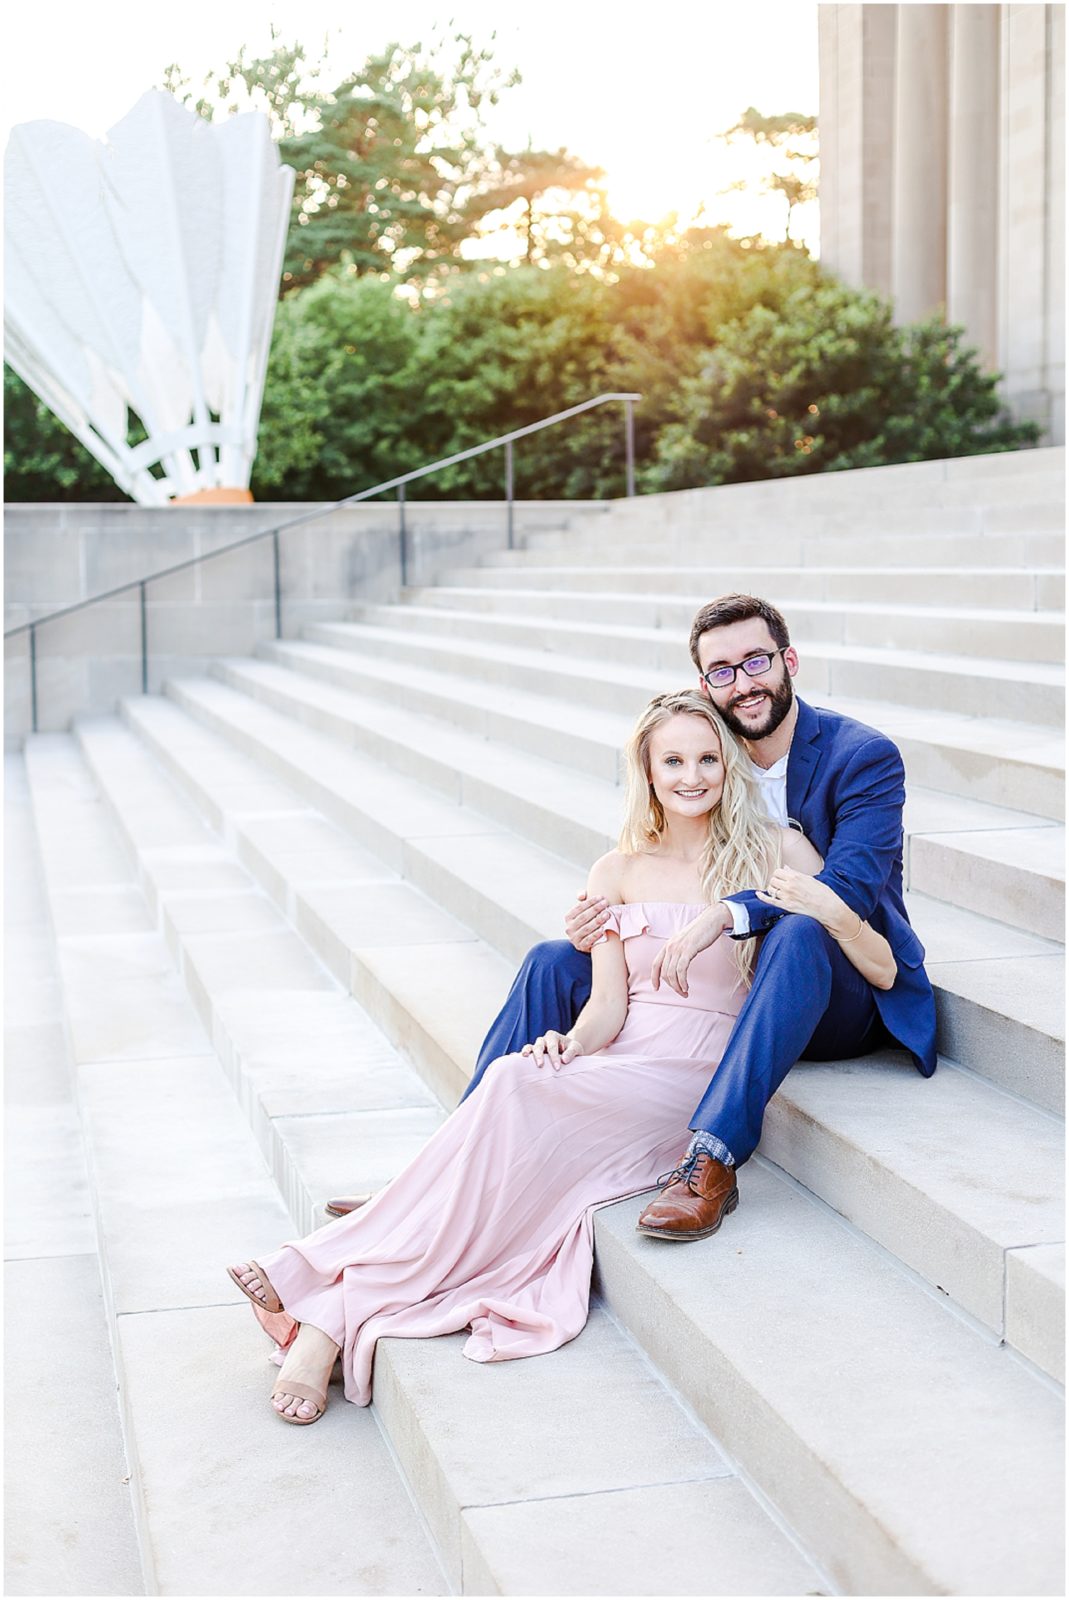 cute couple at sunset sitting on steps - Kansas City Engagement Photos at the Nelson Atkins Museum  - Where to take Photos in Kansas City - Mariam Saifan Photography - Bethany & Josh - The Longview Mansion Wedding 